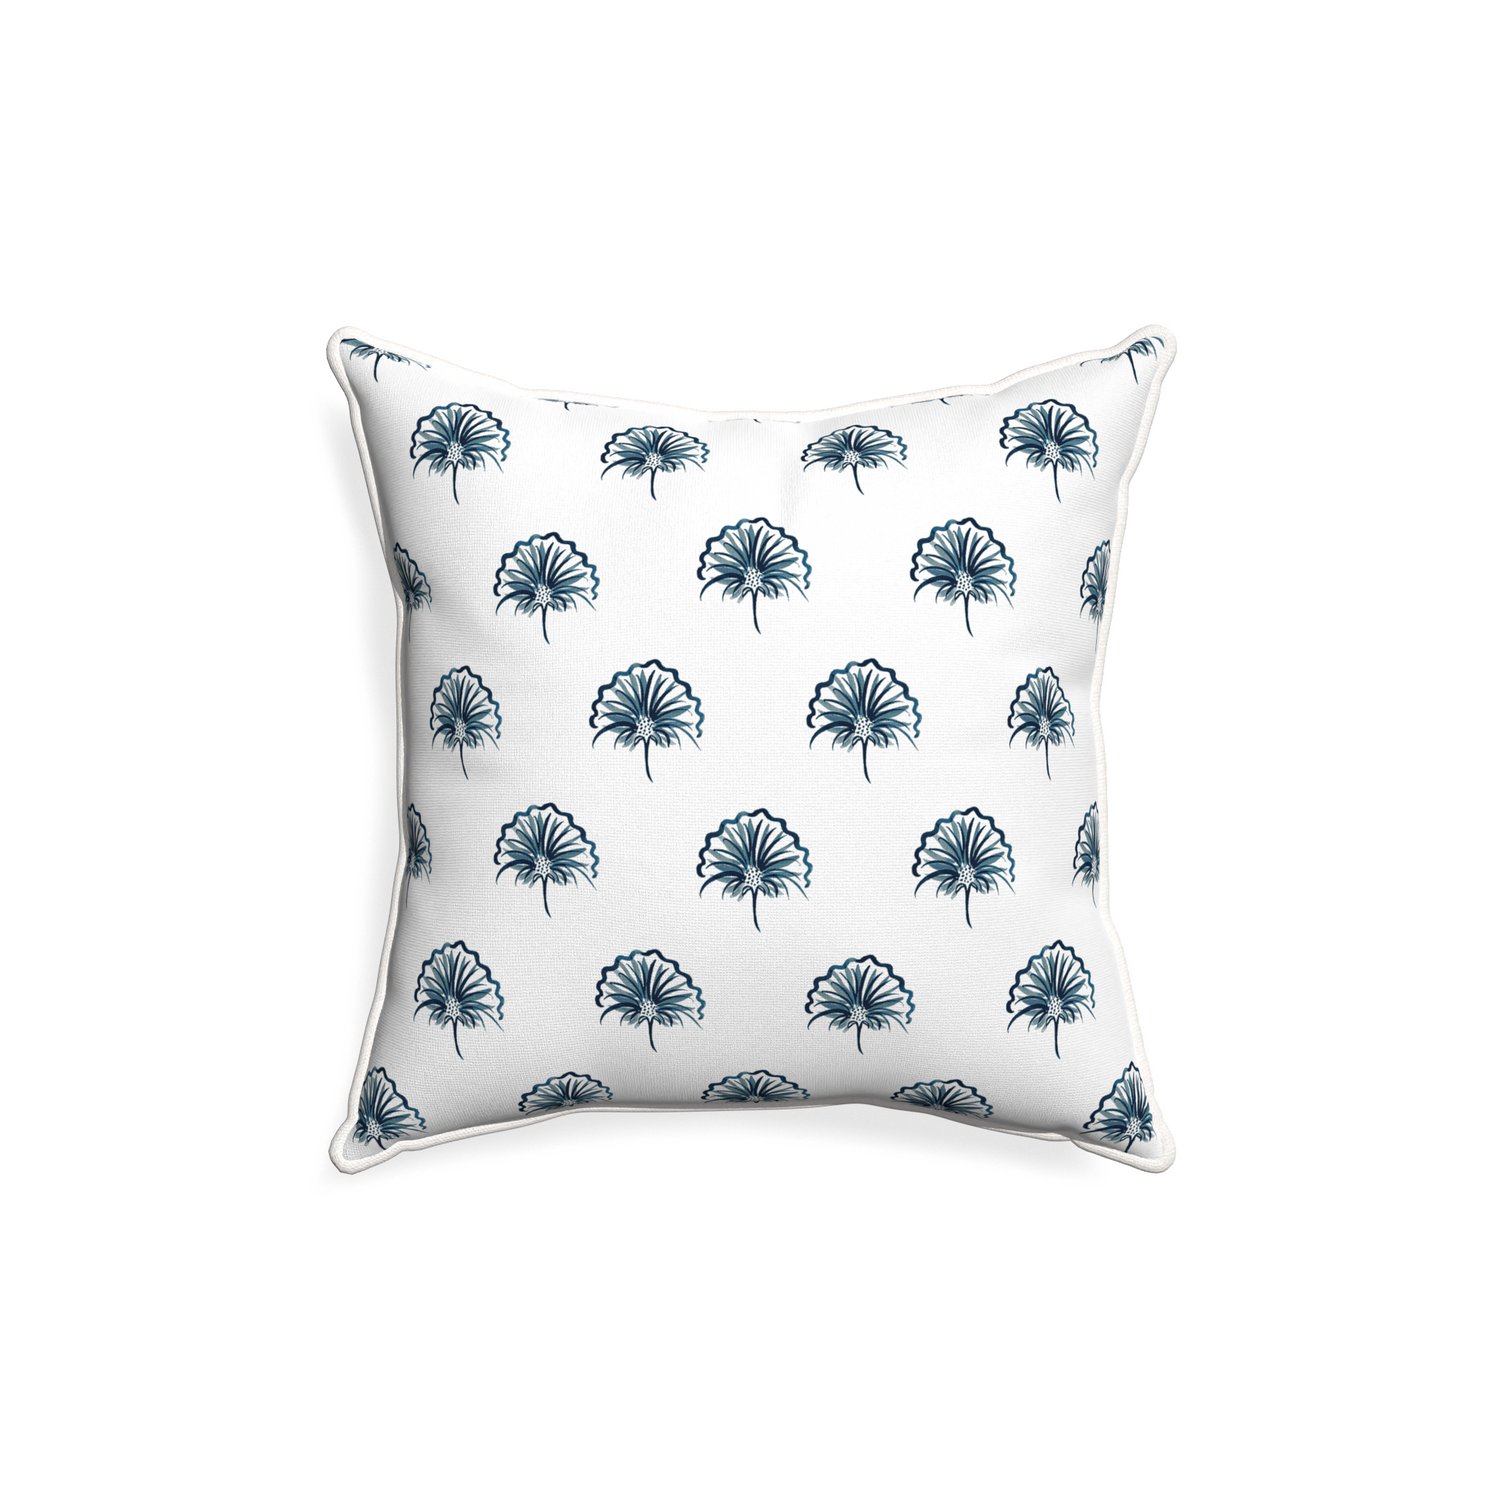 18-square penelope midnight custom floral navypillow with snow piping on white background